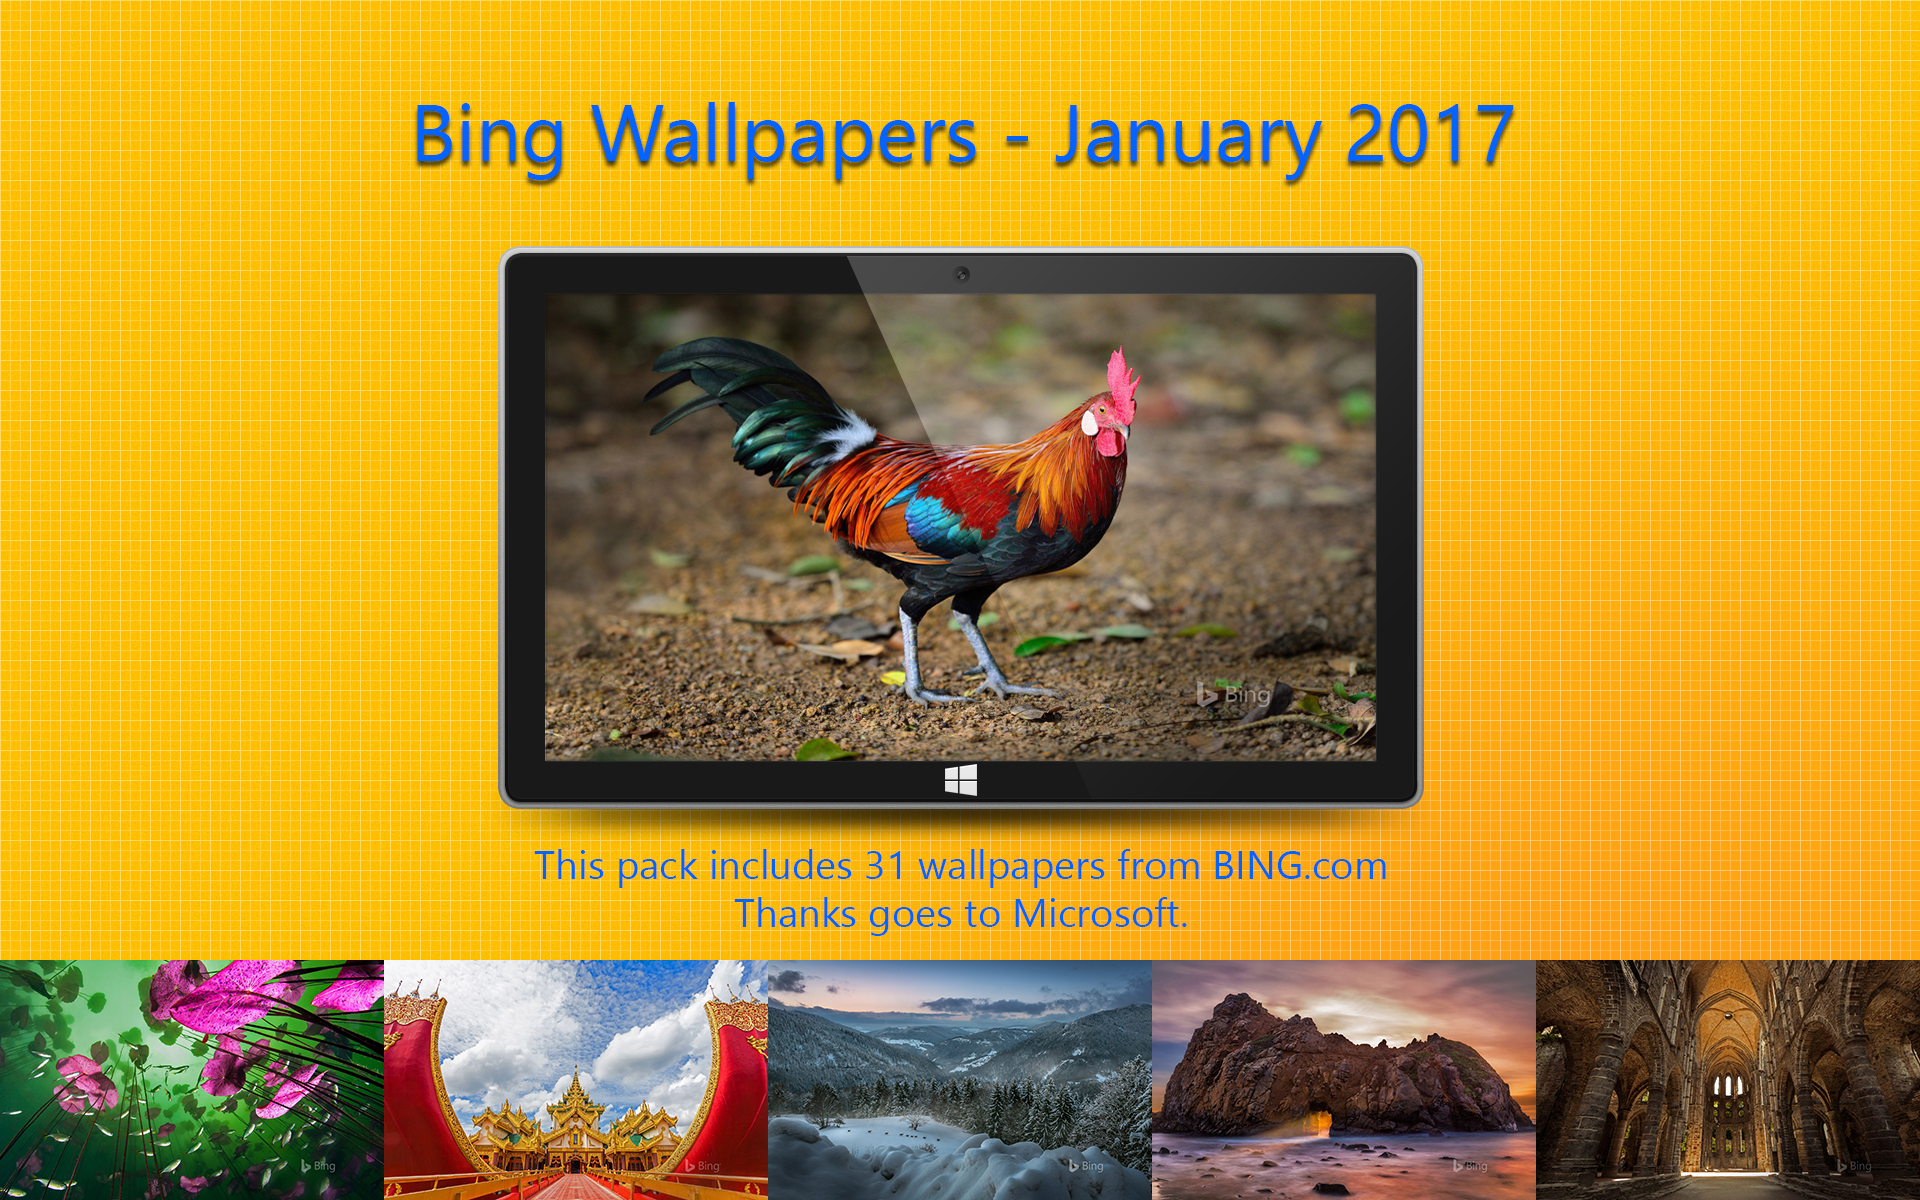 Bing Wallpapers - January 2017 by